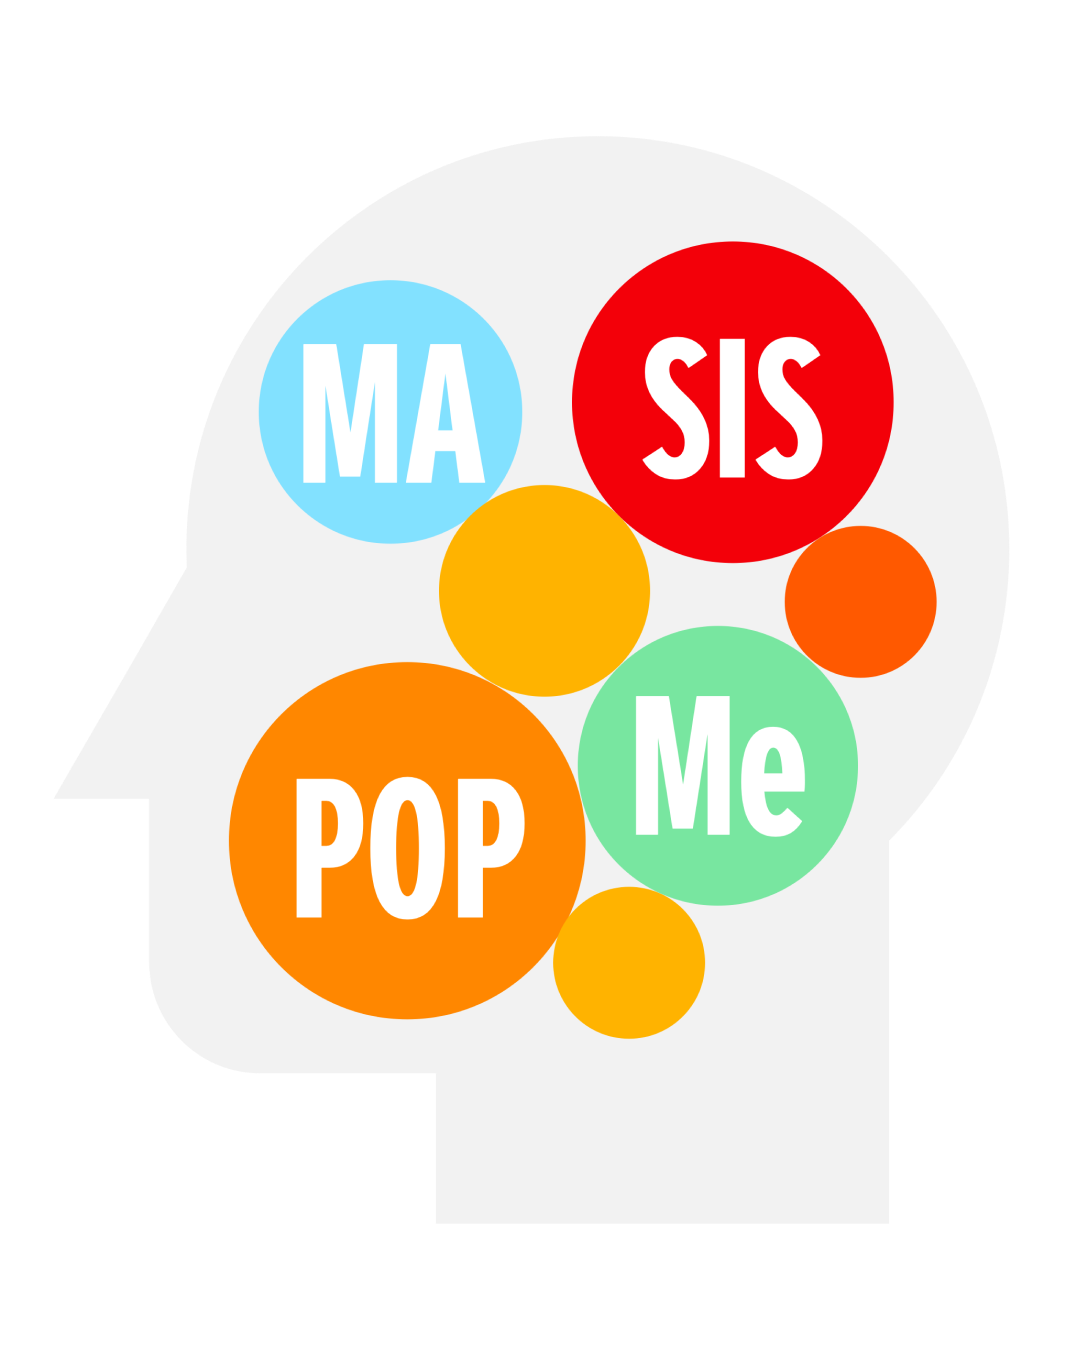 Infographic showing the words “Ma, Pop, Sis and Me” inside the silhouette of a human head